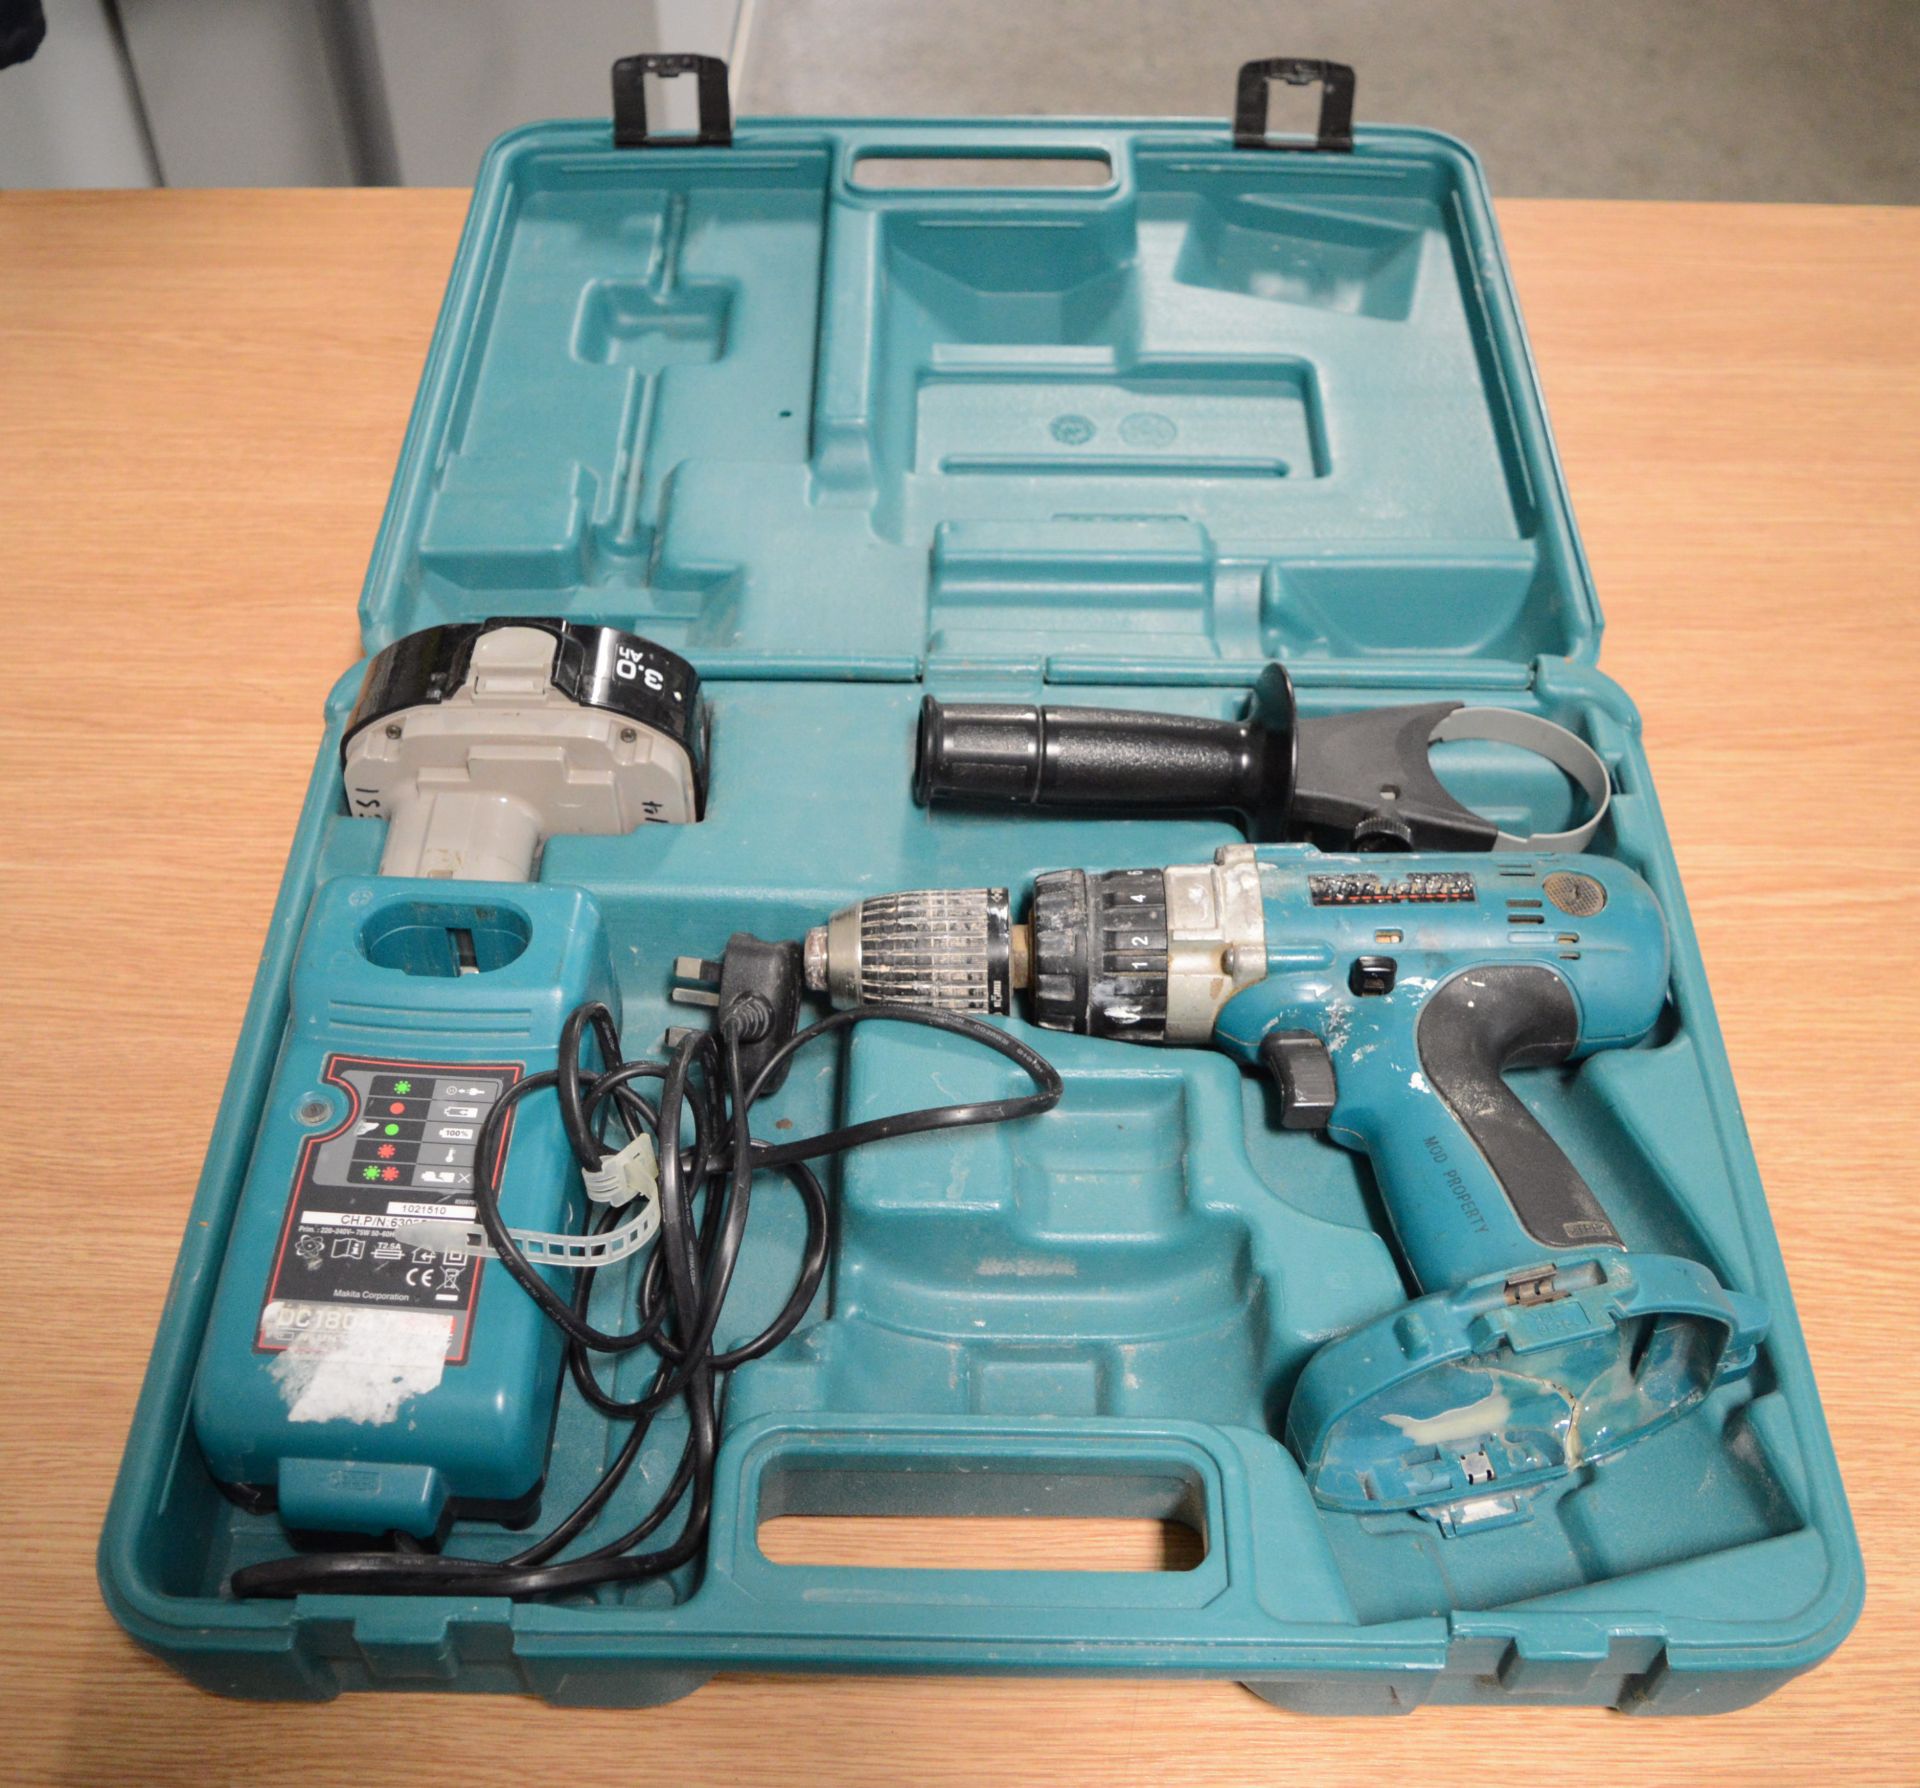 Makita Drill Portable 18V 1x Battery & Charger in a case - Thought not to be working.